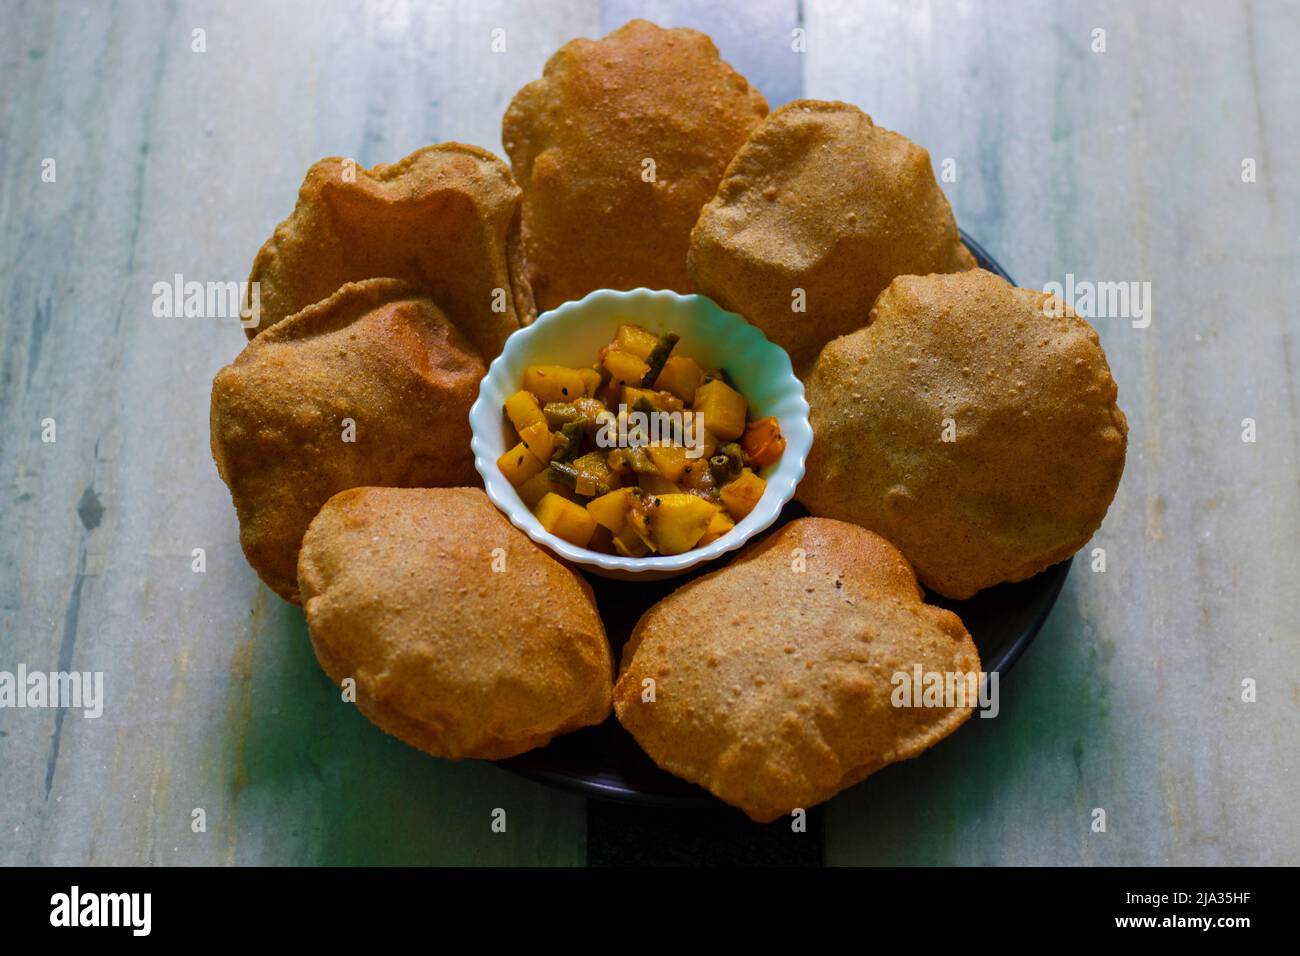 popular food in south Asian countries like India,Pakistan,Bangladesh 'puri' made of millet flour. Stock Photo